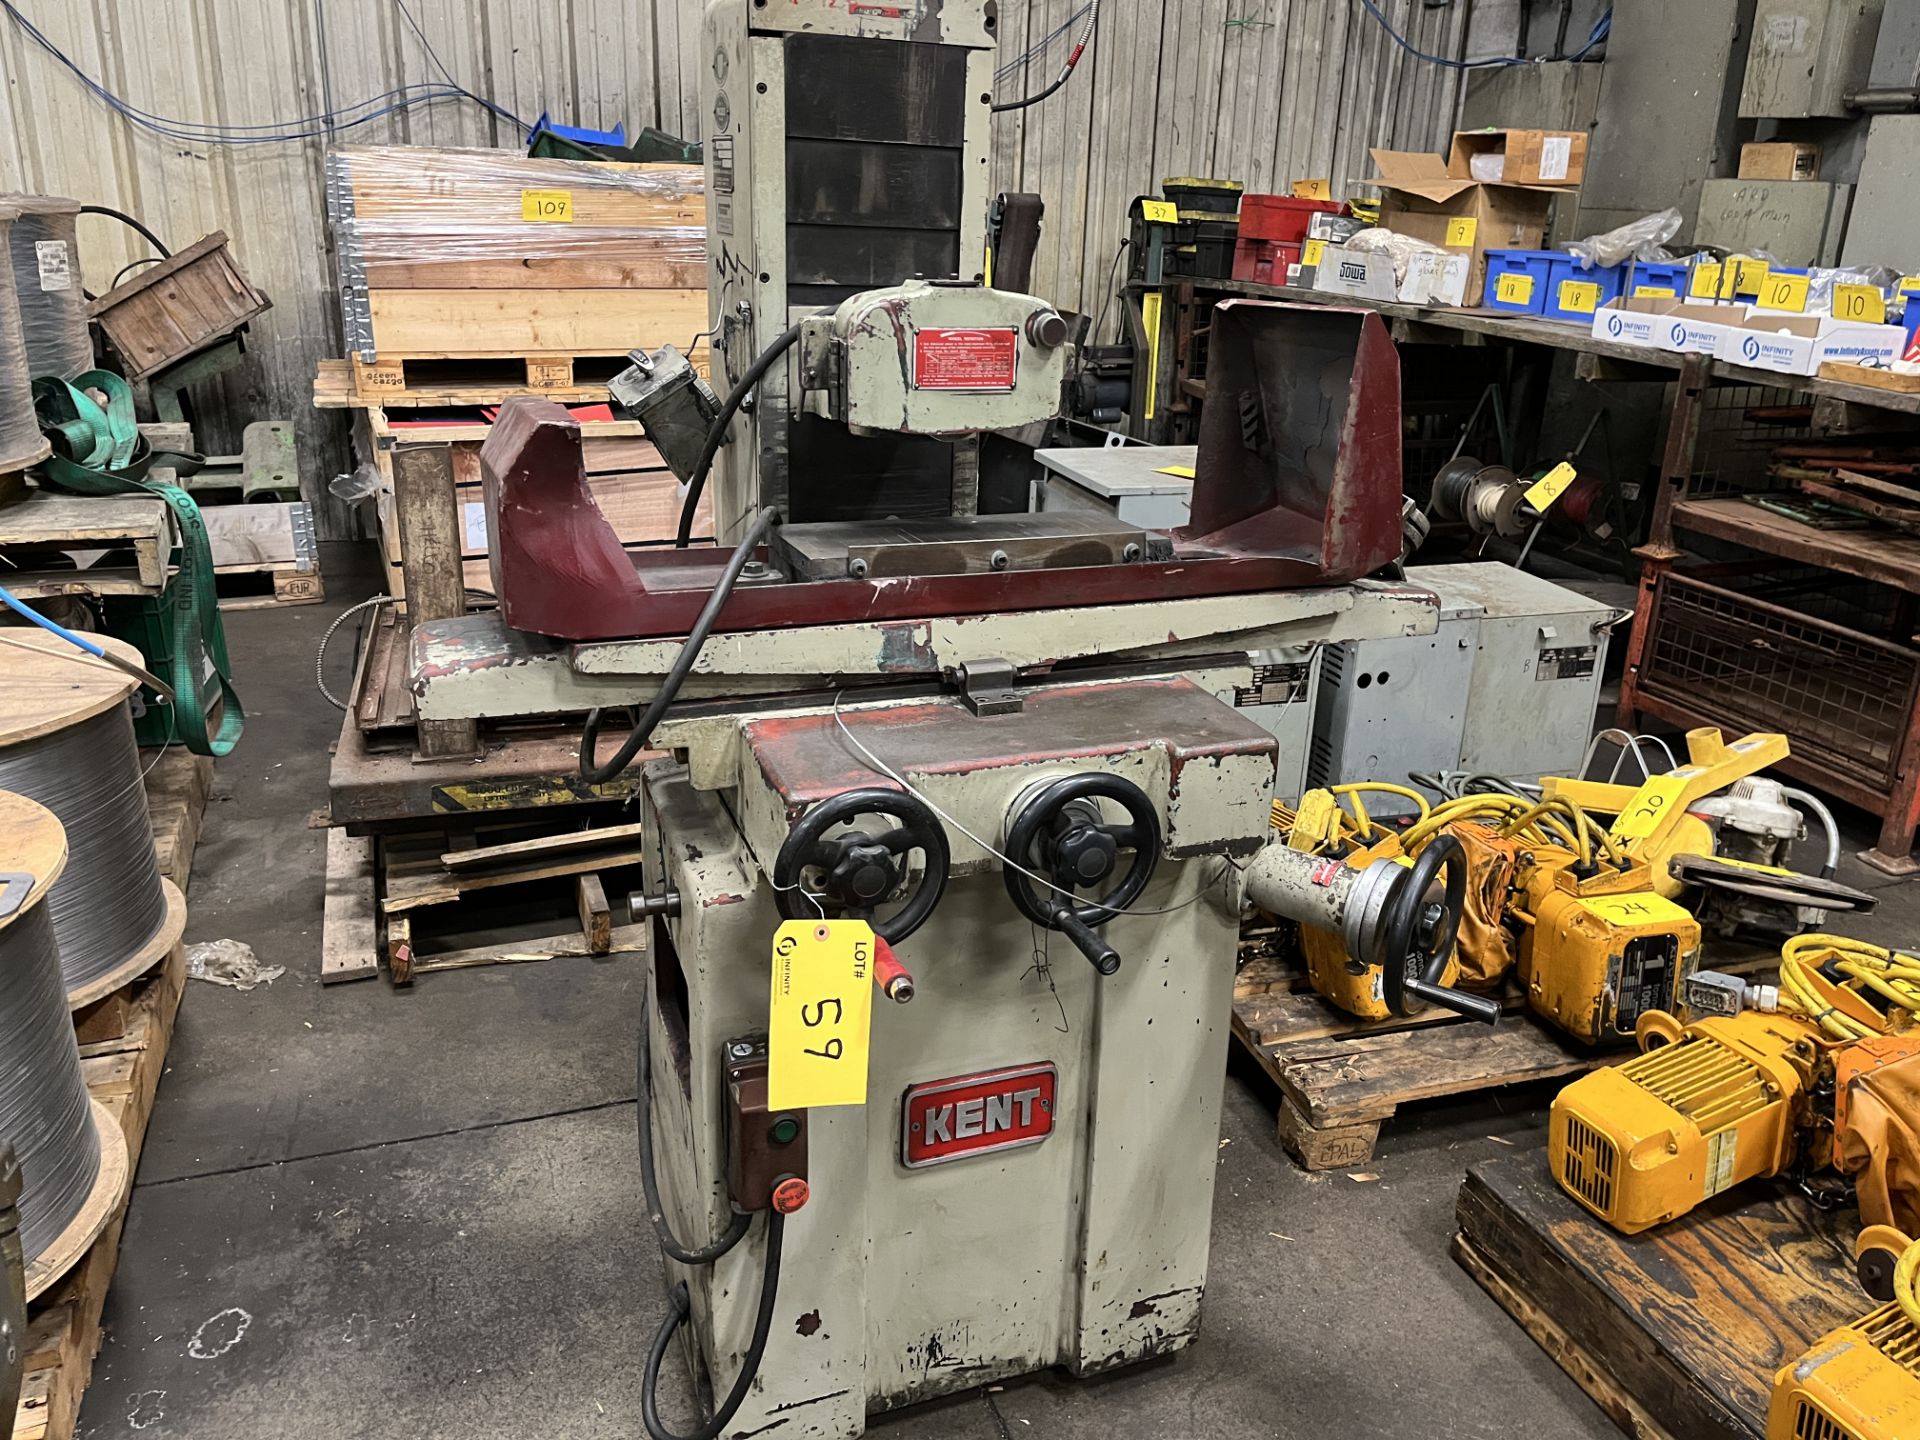 KENT KGS-200 SURFACE GRINDER, 8" X 16" MAGNETIC CHUCK, S/N 820201 (RIGGING FEE $300)